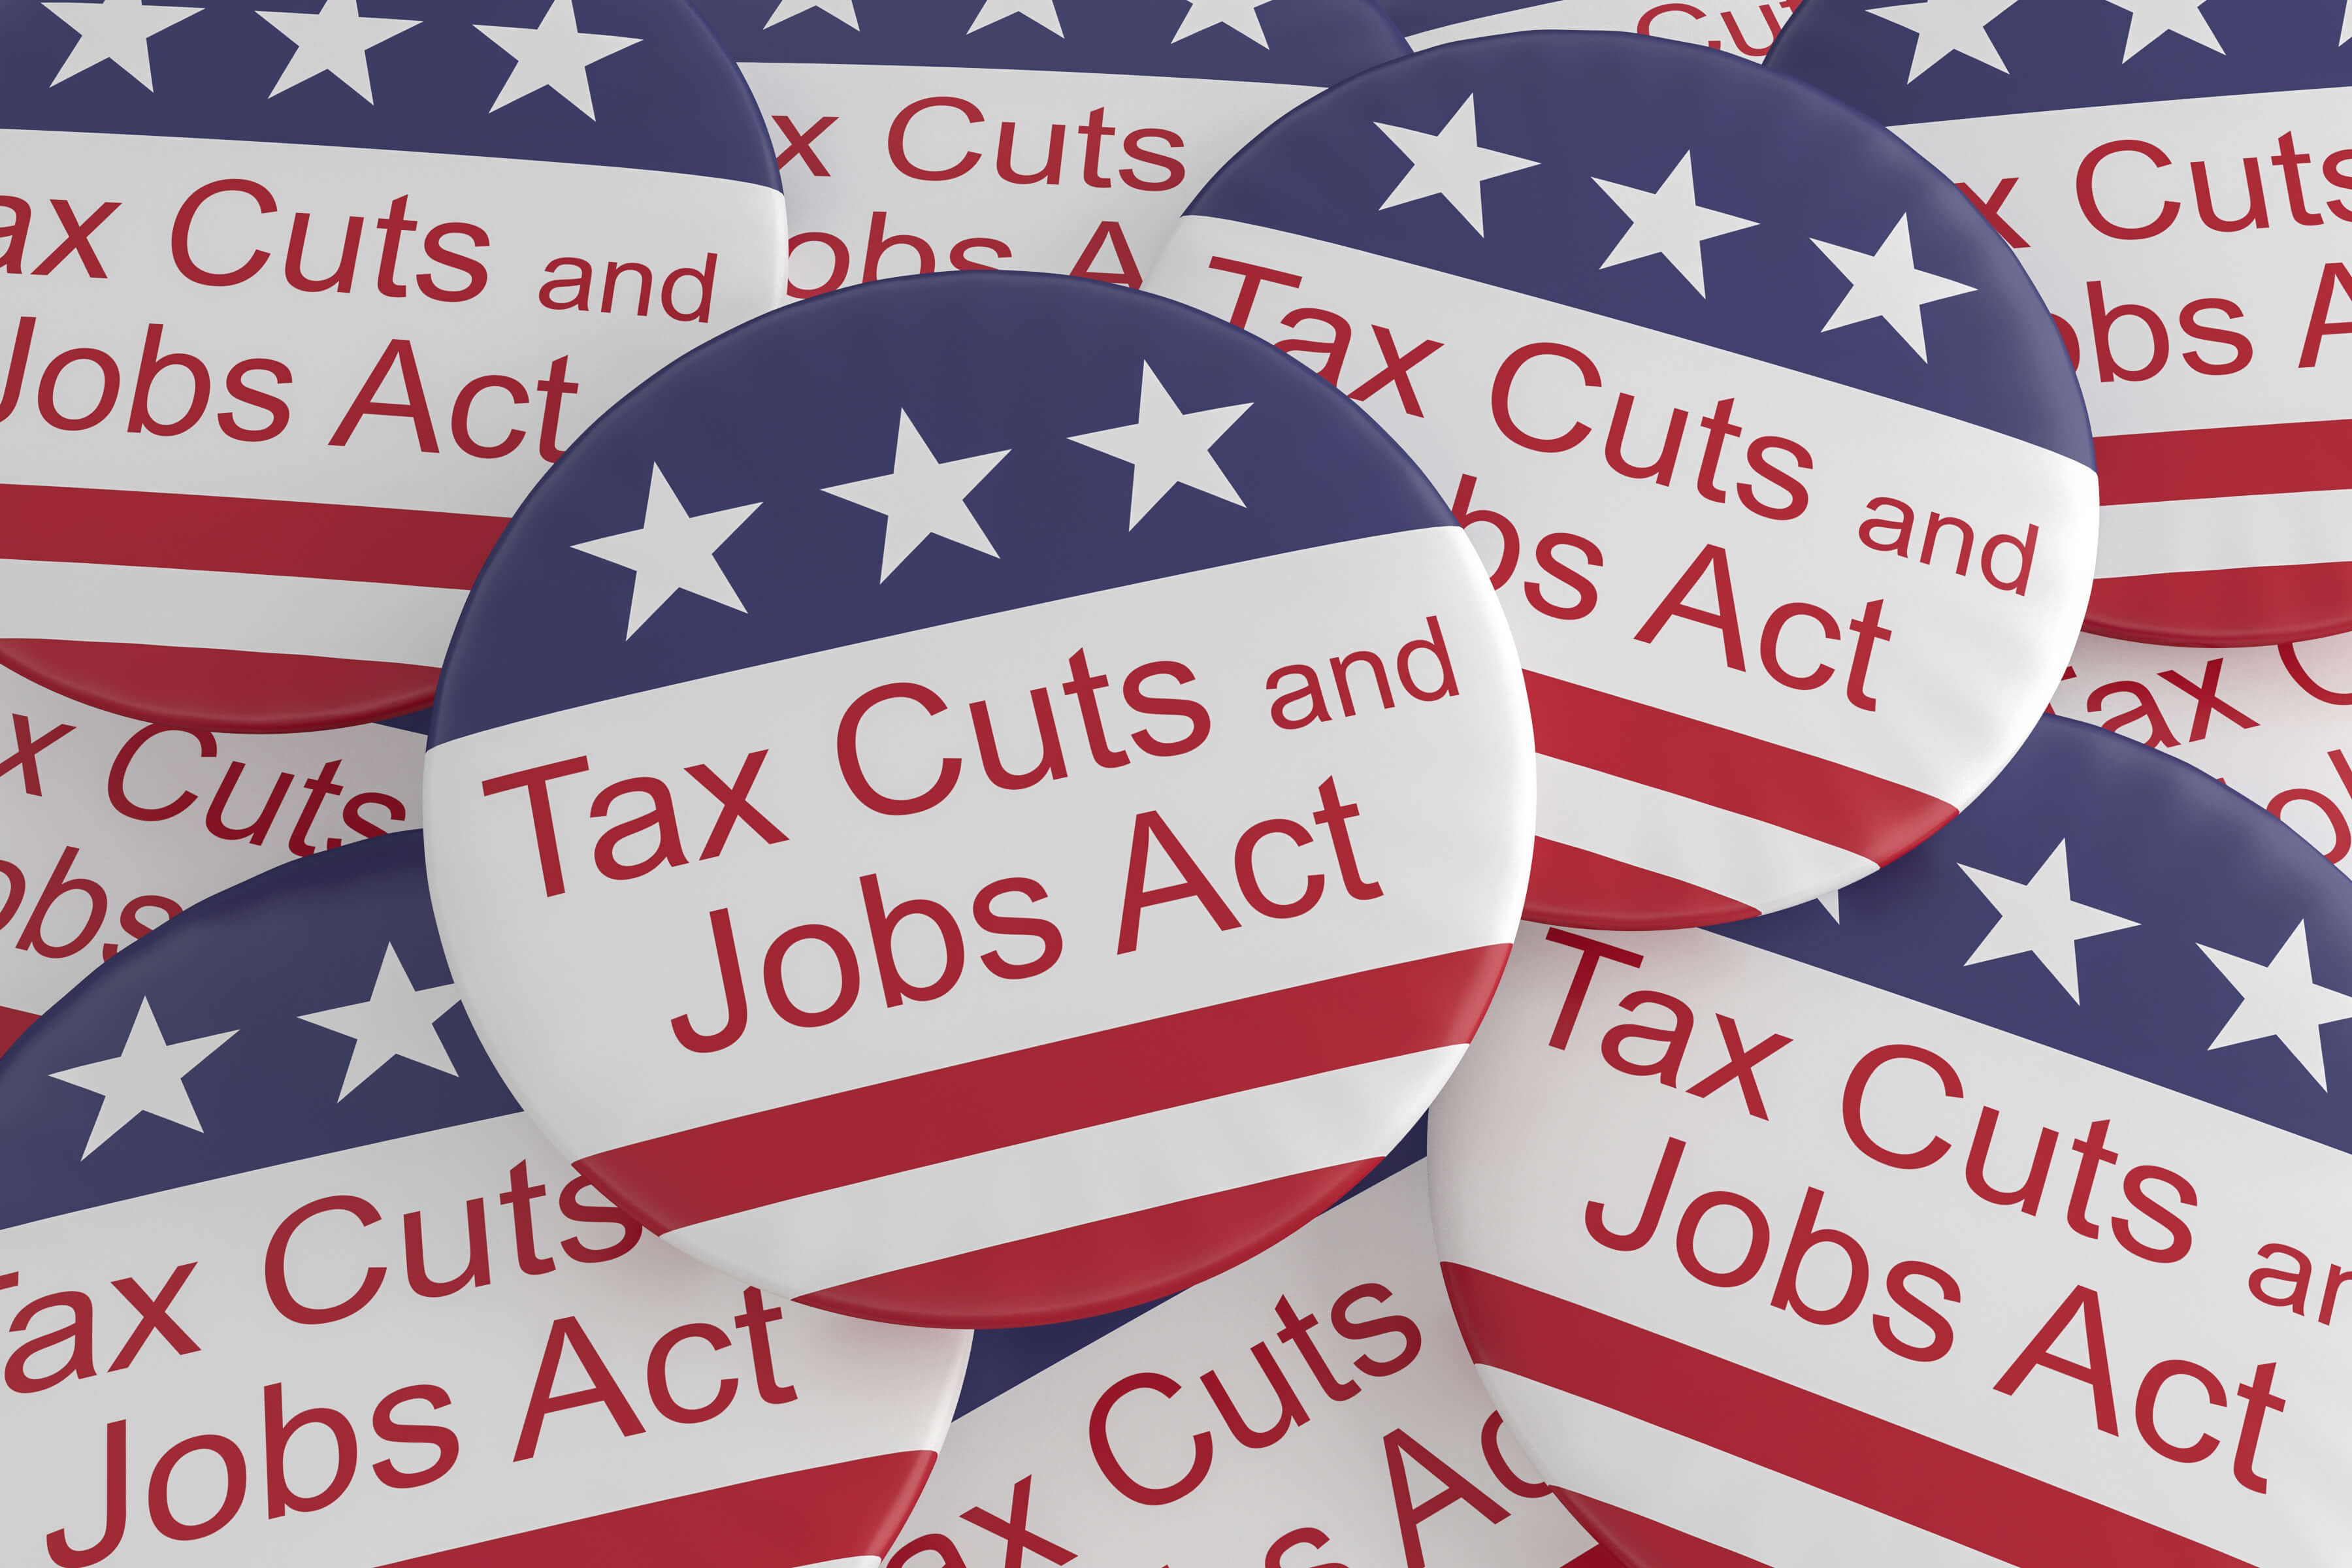 Tax Cuts and Jobs Act - Complete Controller